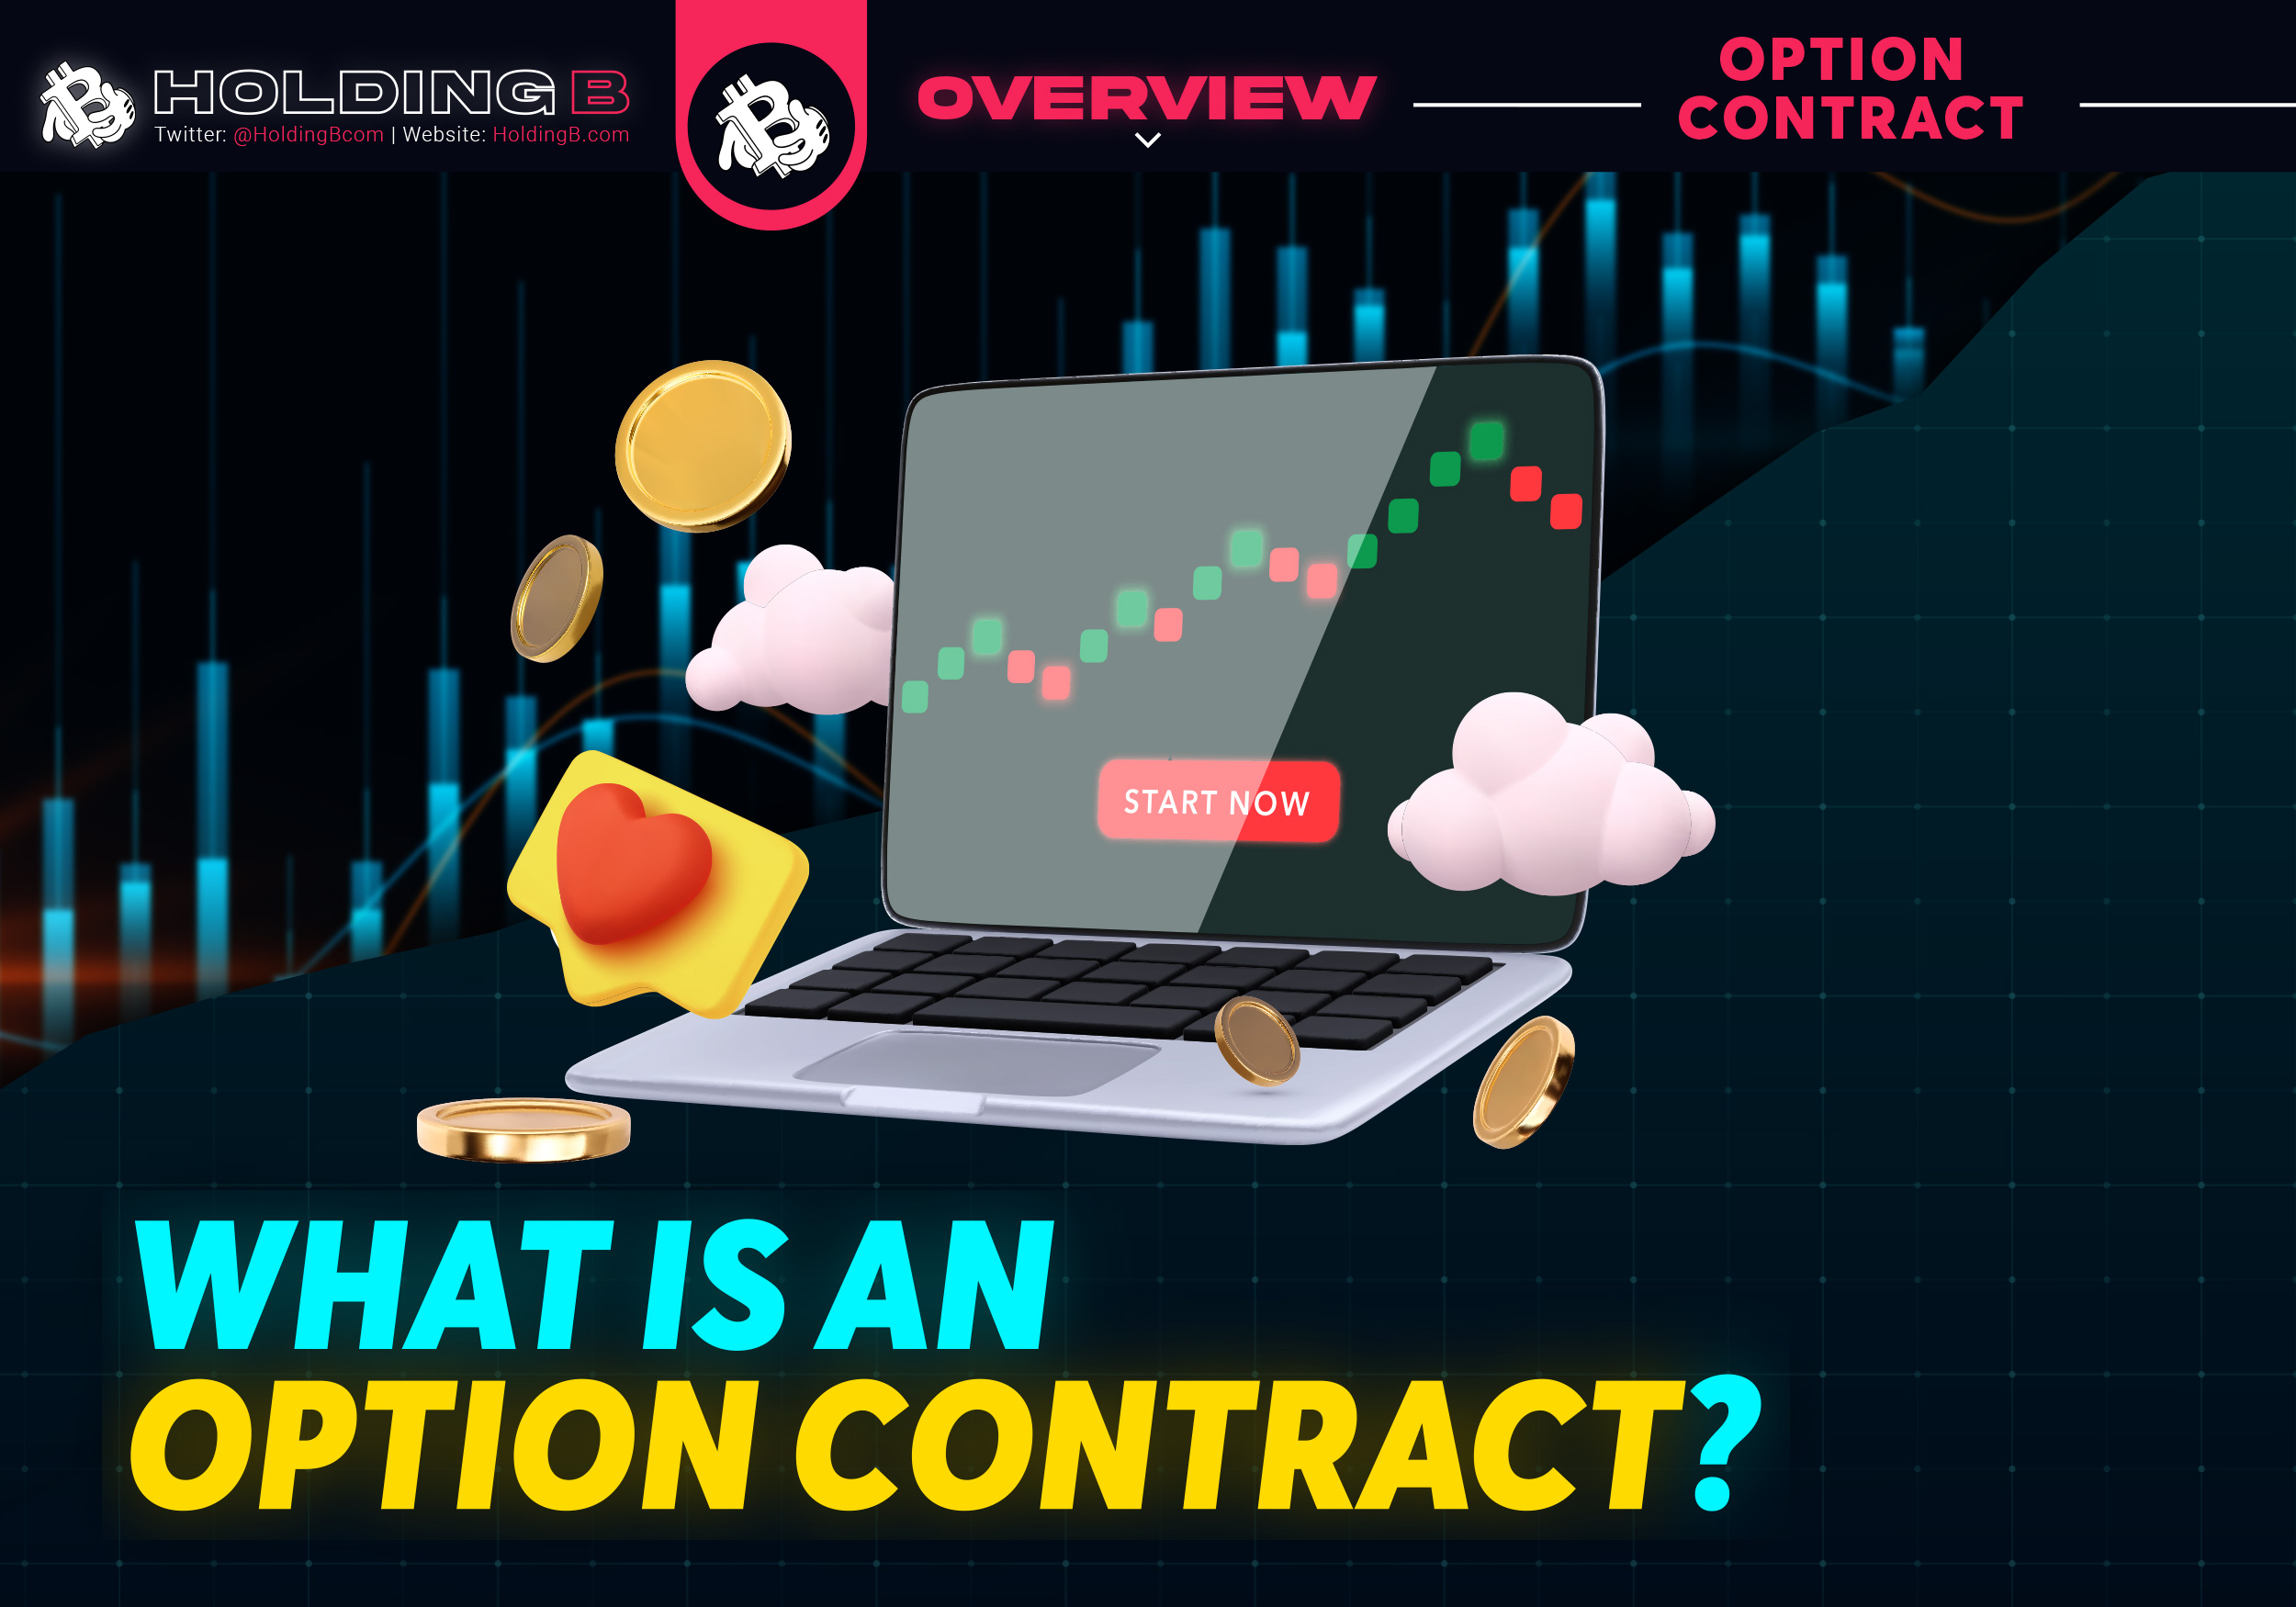 WHAT IS AN OPTION CONTRACT?